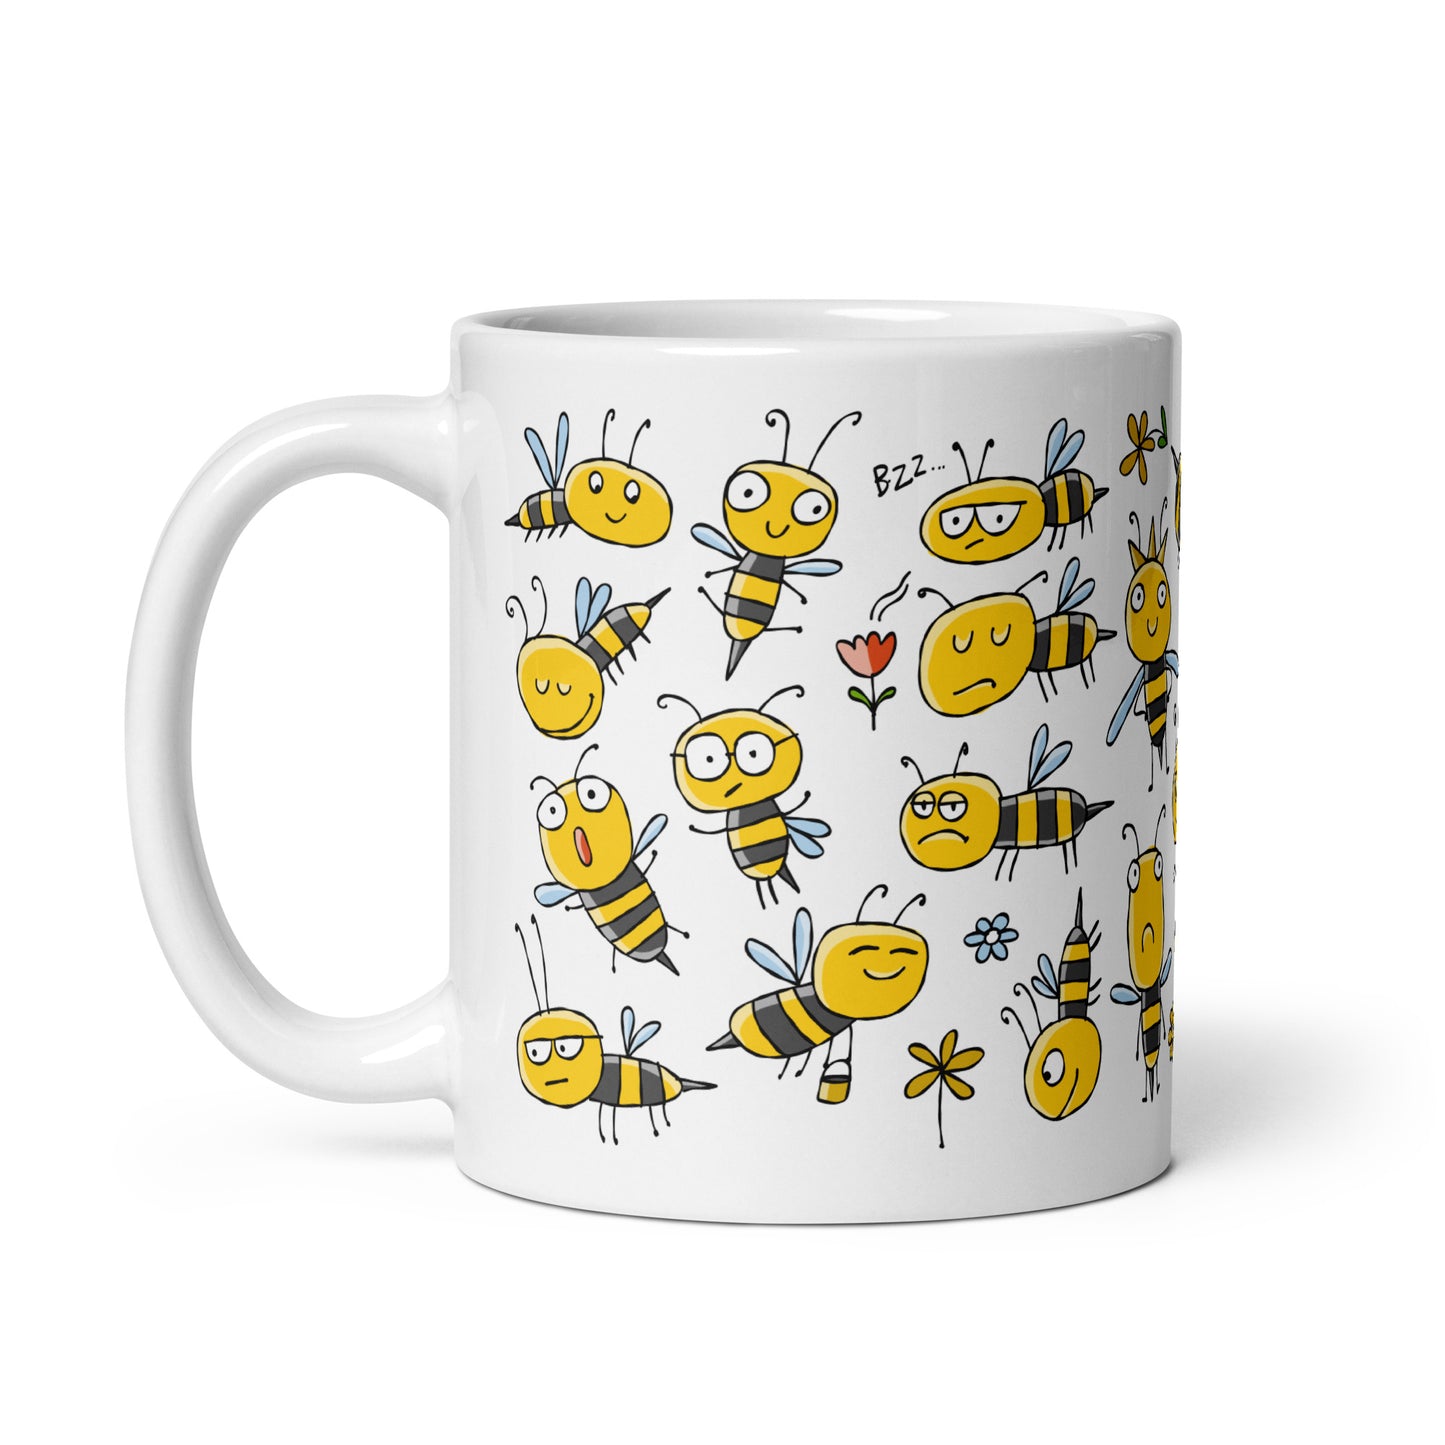 11 oz ceramic mug with Beehive print - funny and cute yellow bees characters.